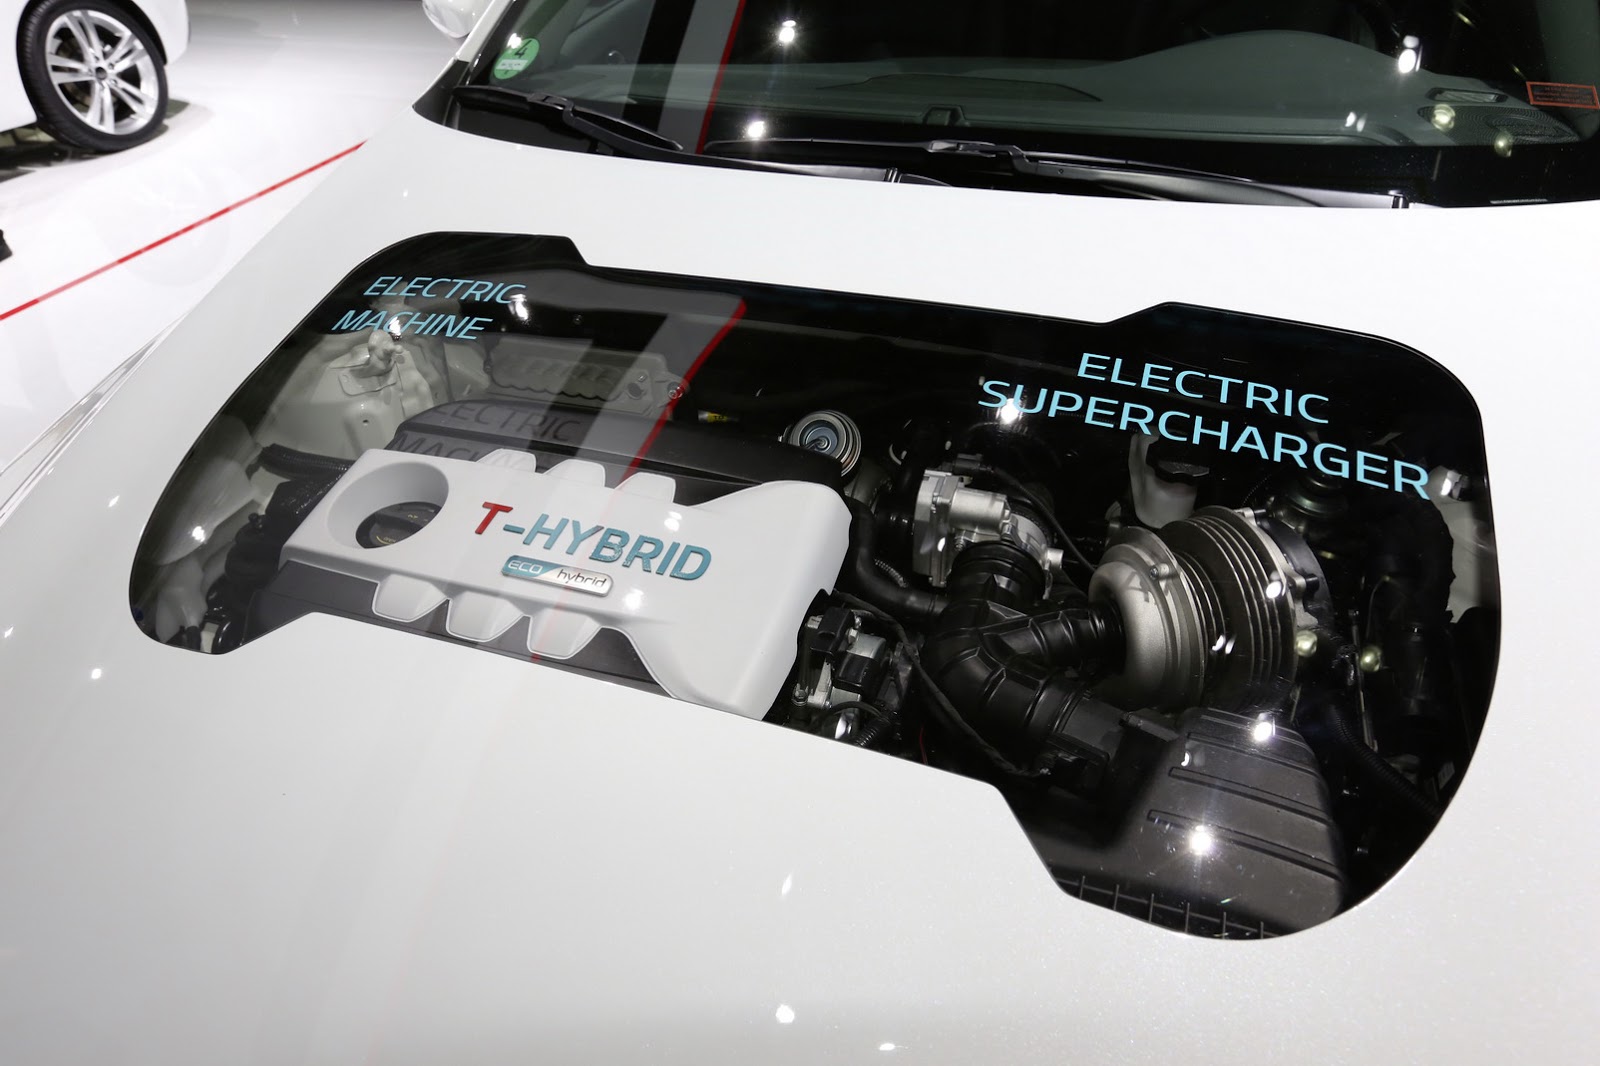 Kia's Optima T-Hybrid Bolts an Electrical Supercharger on Turbo Diesel Engine | Carscoops1600 x 1066